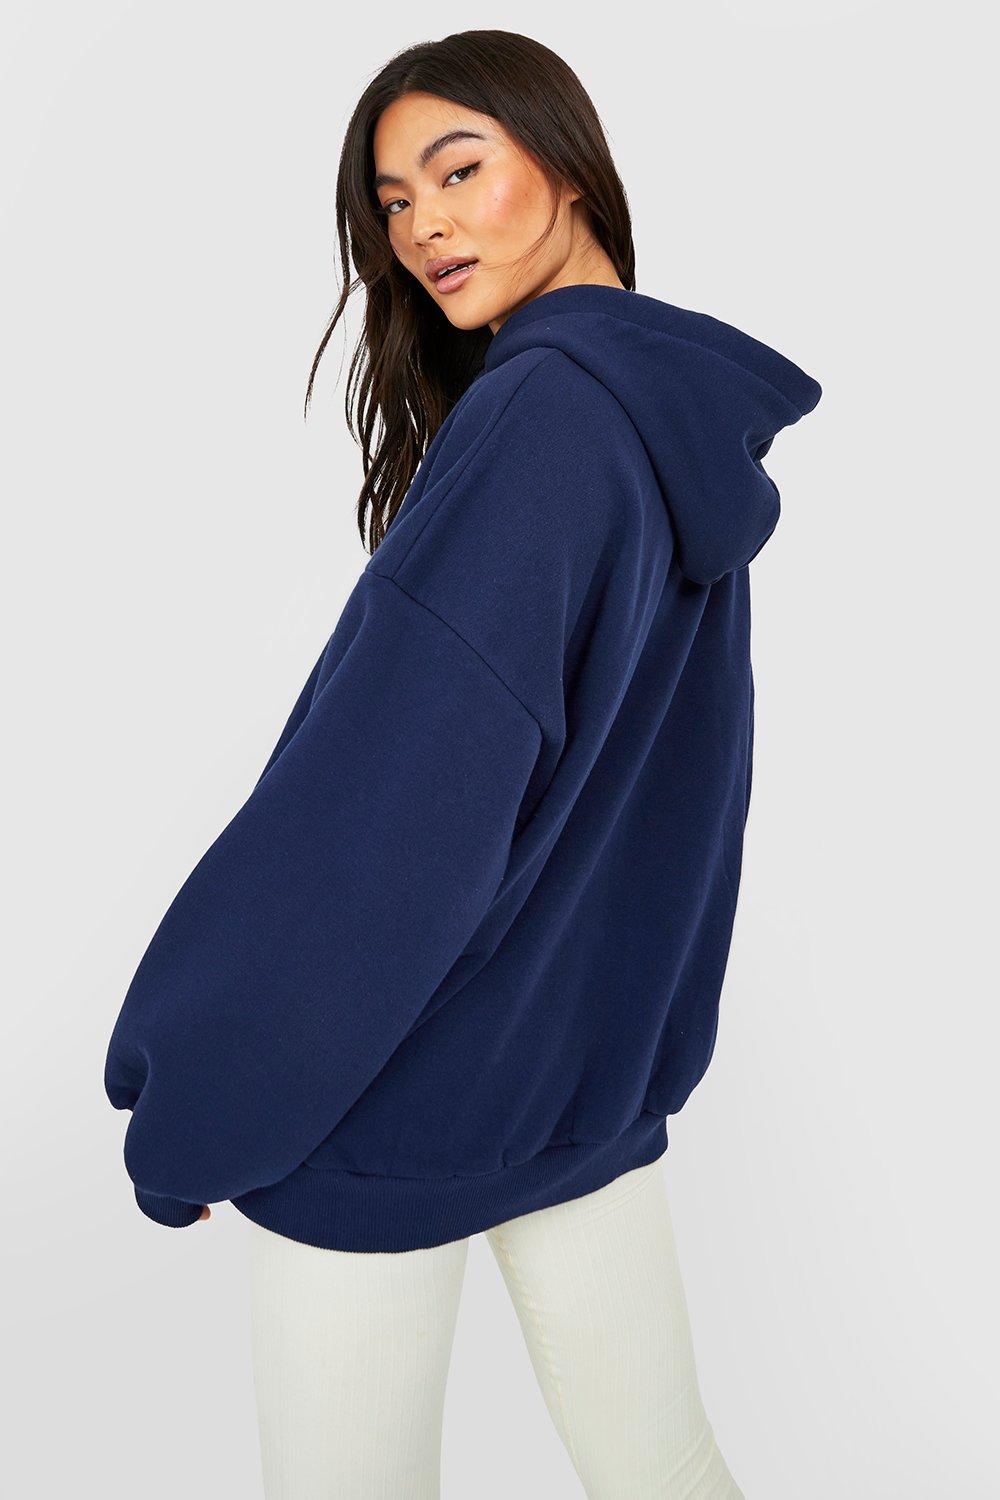 https://media.boohoo.com/i/boohoo/gzz35122_navy_xl_1/female-navy-outdoors-essentials-embroidered-oversized-hoodie